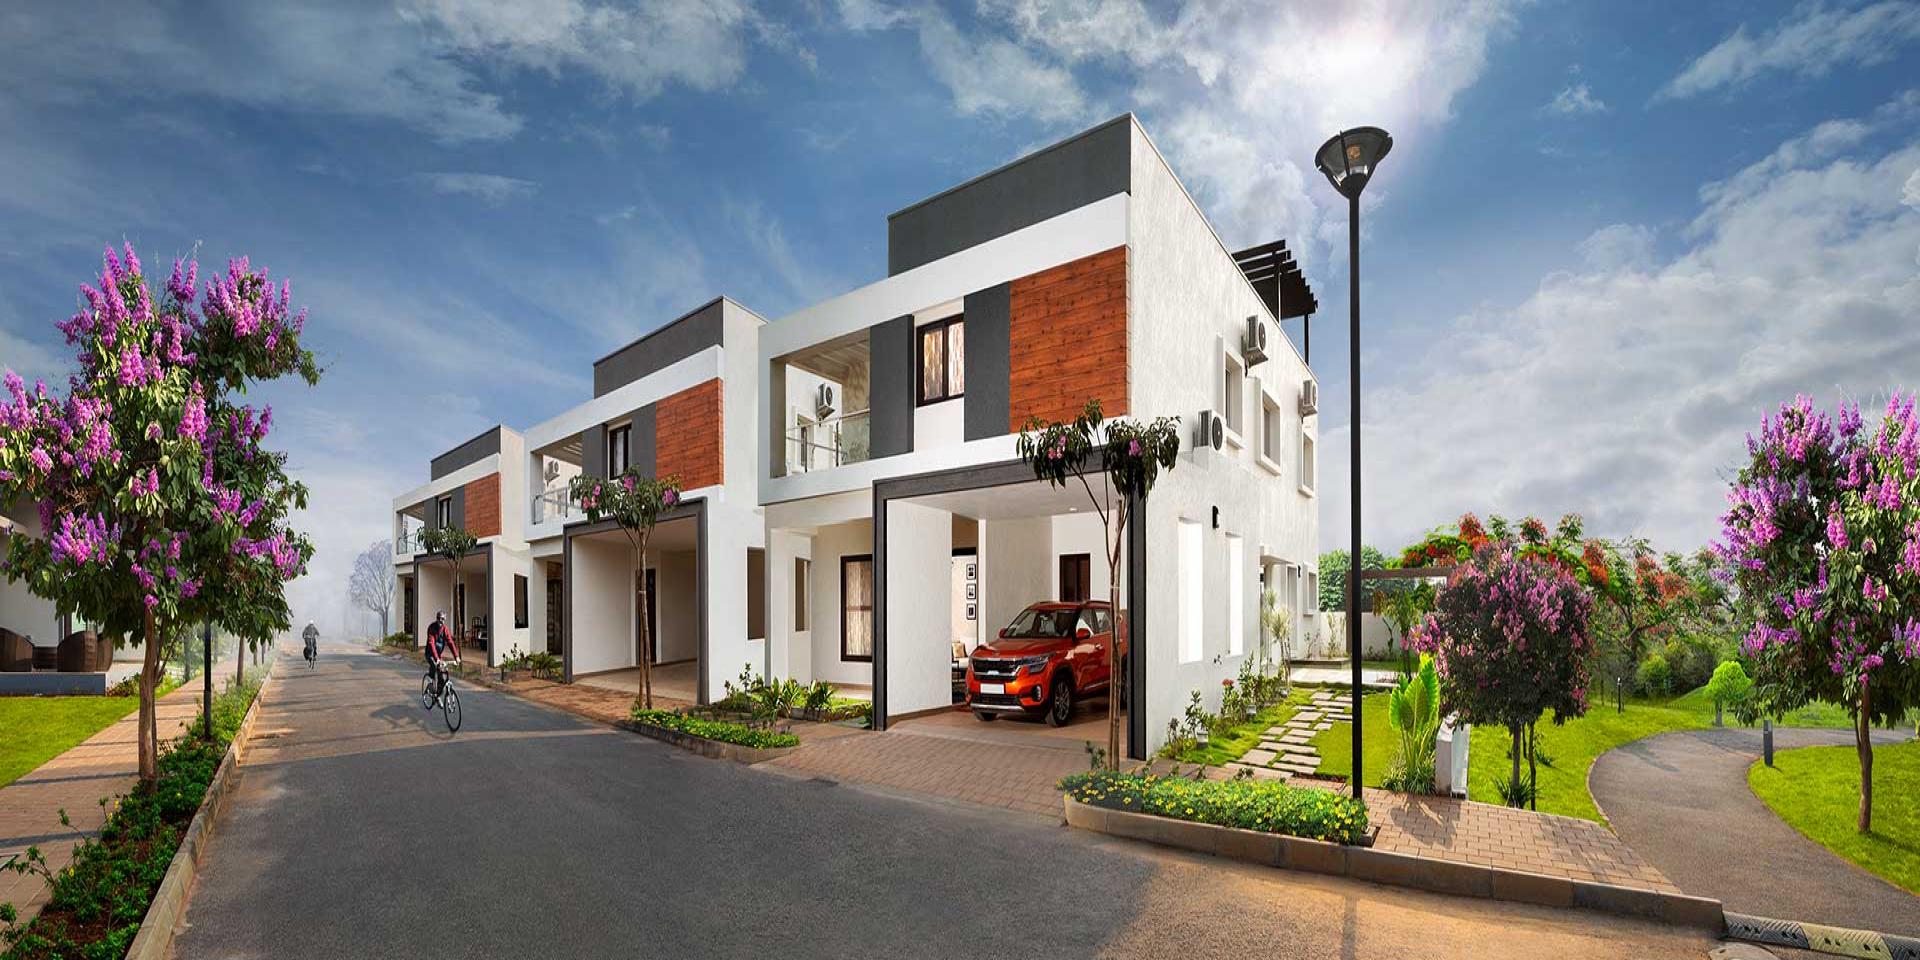 3, 4 BHK House for sale in Off Sarjapur Road